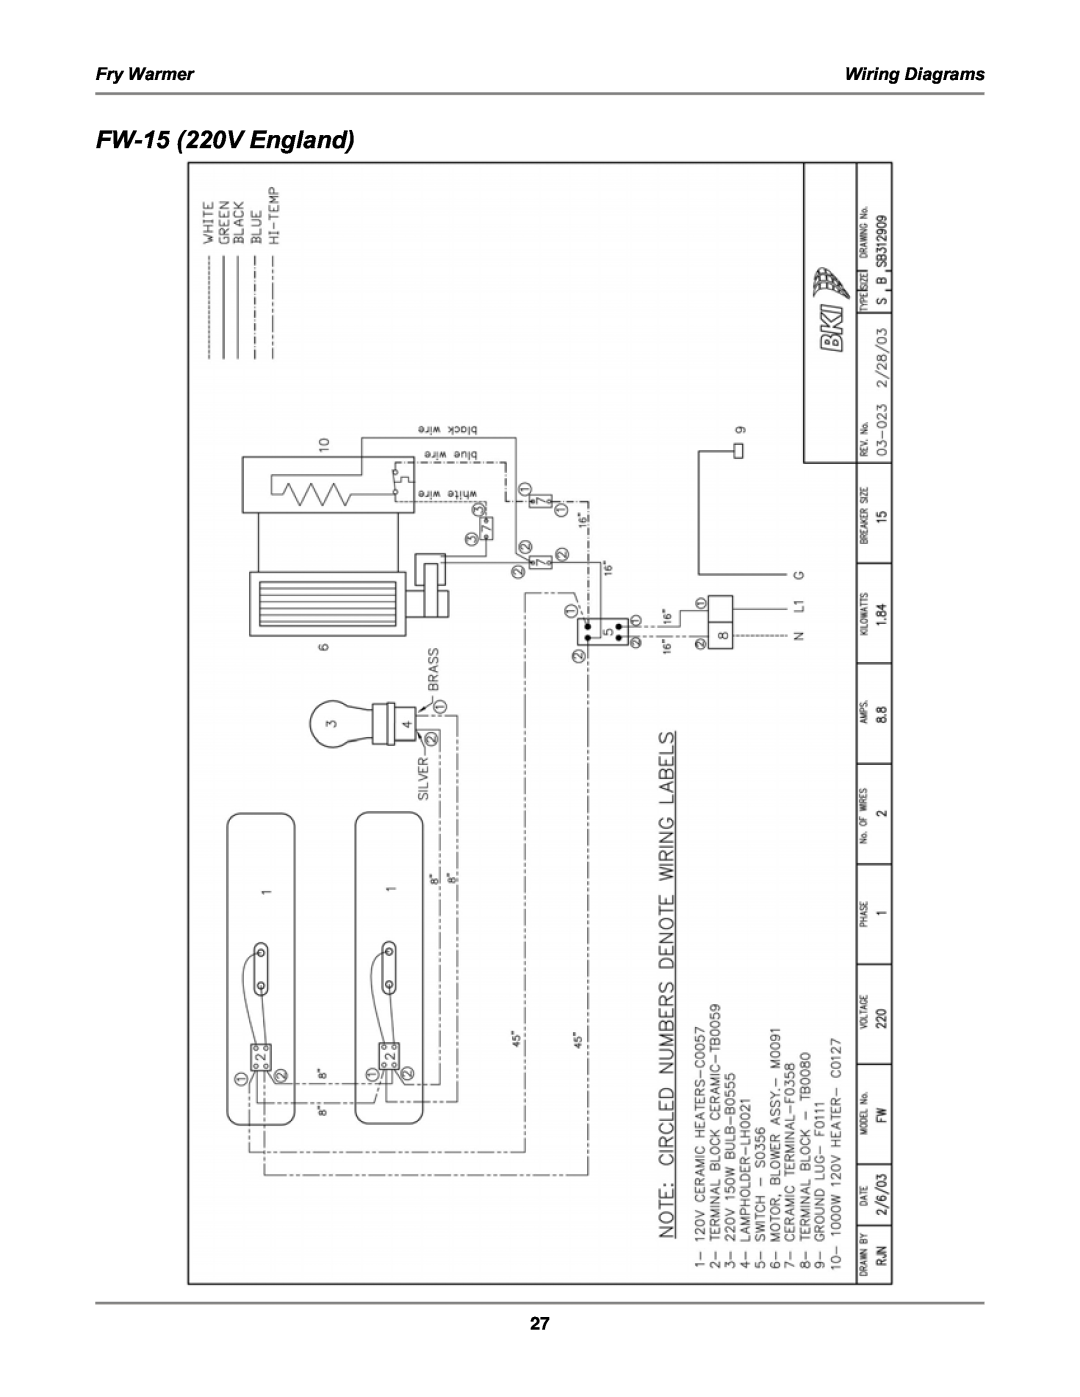 Bakers Pride Oven FW-12T, FW-15T, FW-15DTO manual FW-15220V England, Fry Warmer, Wiring Diagrams 